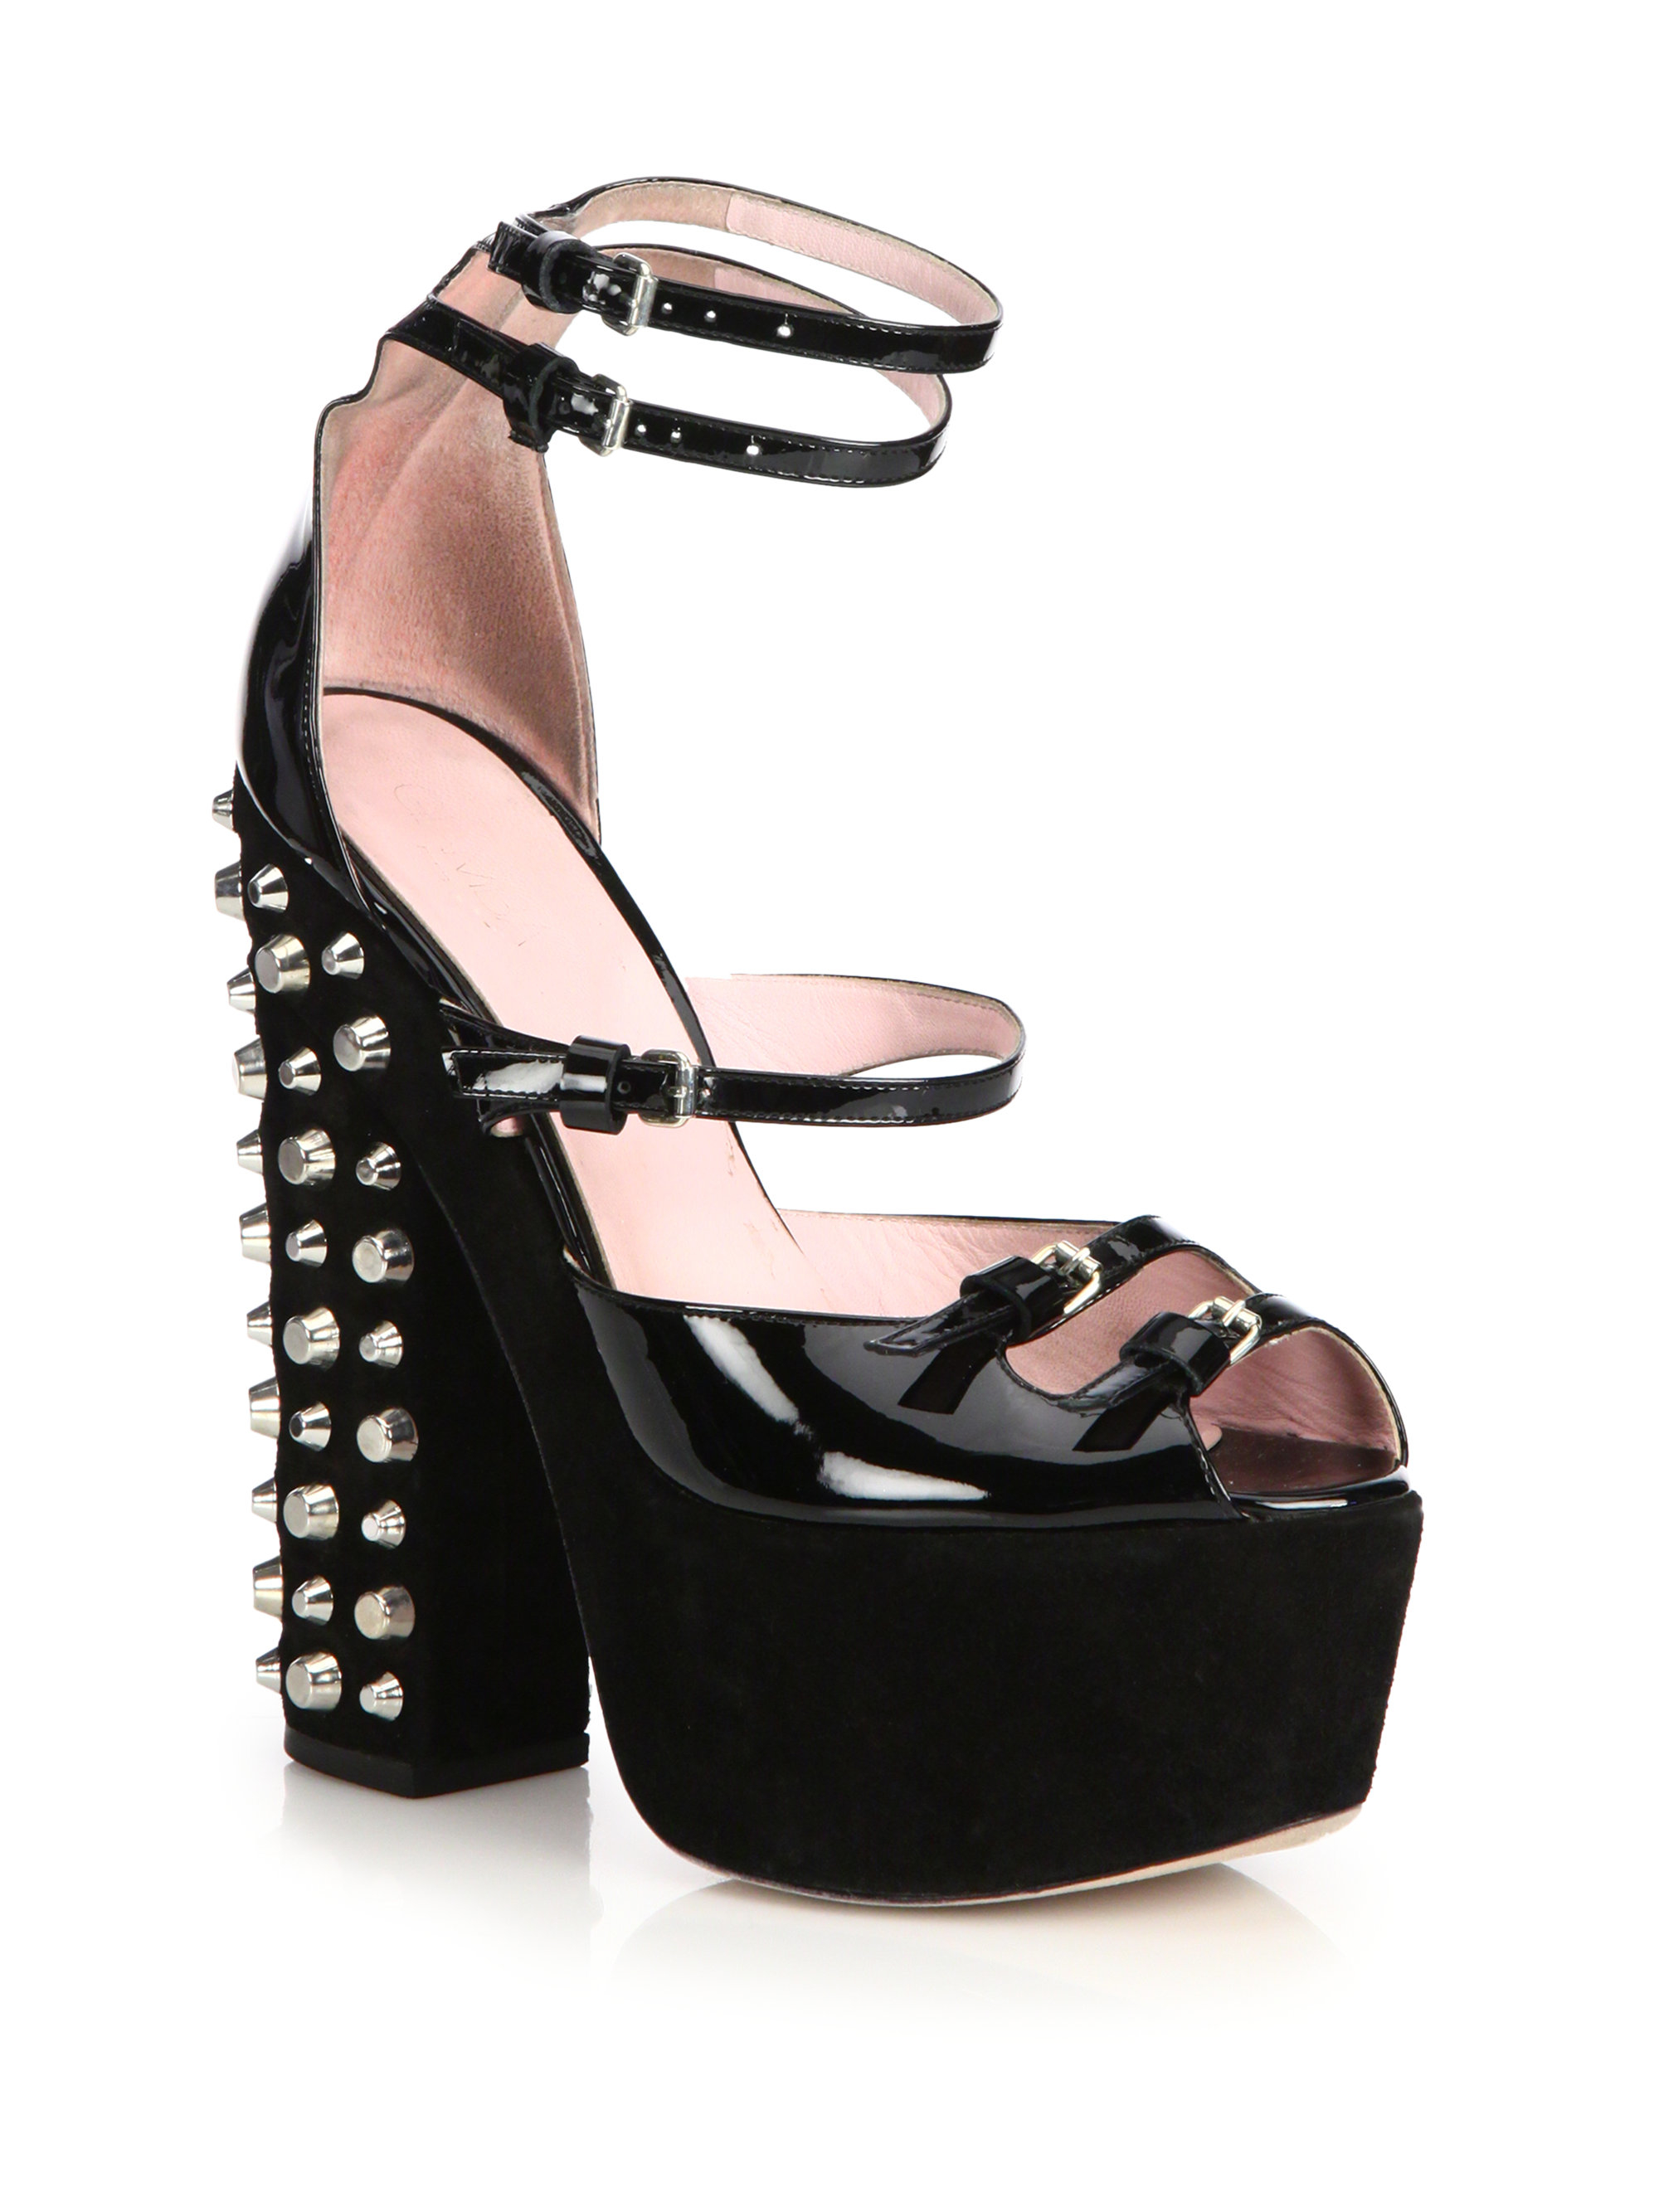 Lyst - Giamba Patent Leather & Suede Studded Platform Sandals in Black